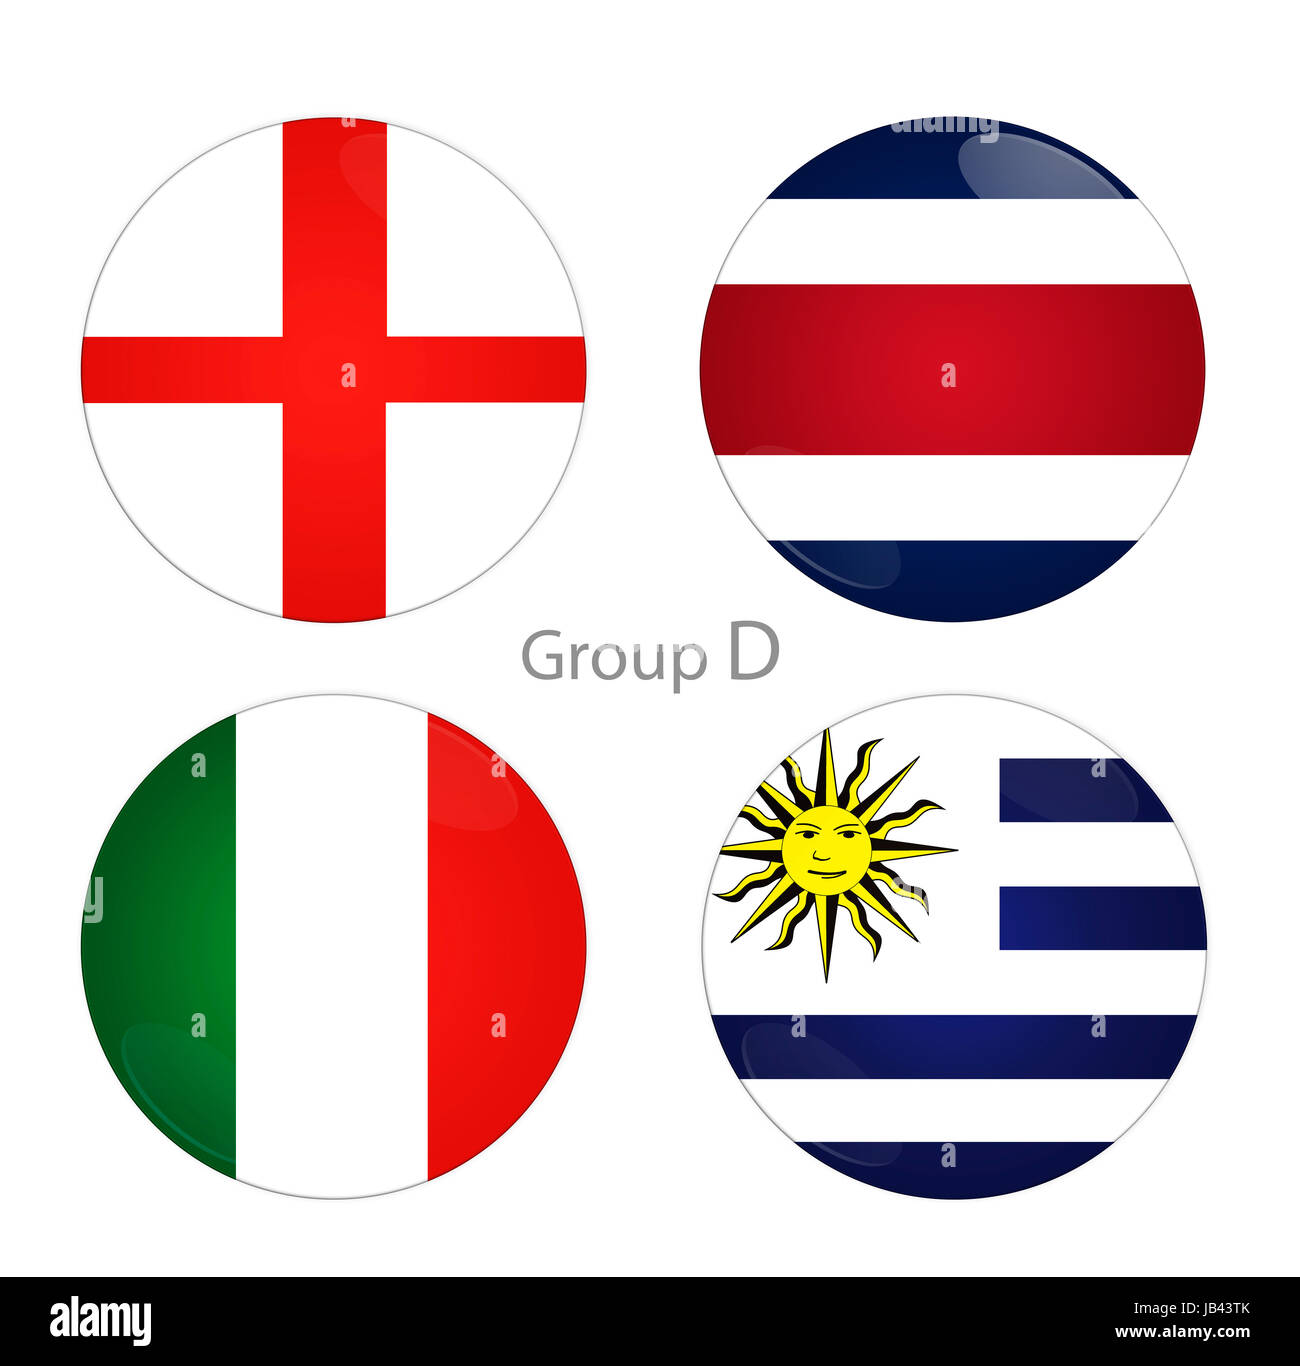 Group D - England, Costa Rica, Italy, Uruguay at world cup 2014 Stock Photo